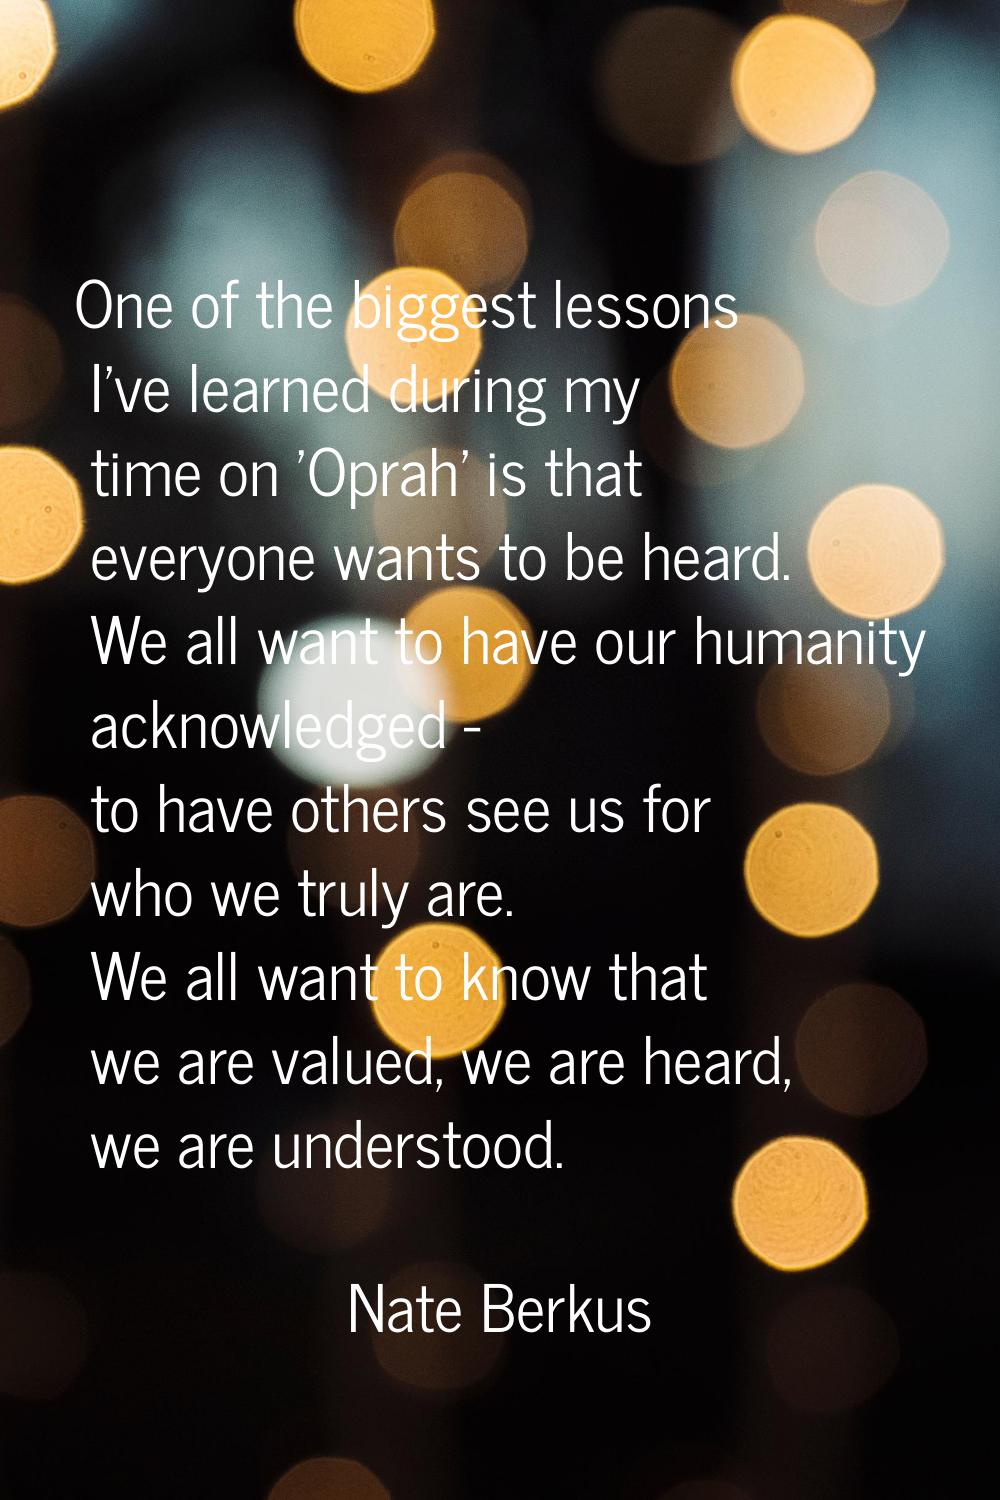 One of the biggest lessons I've learned during my time on 'Oprah' is that everyone wants to be hear